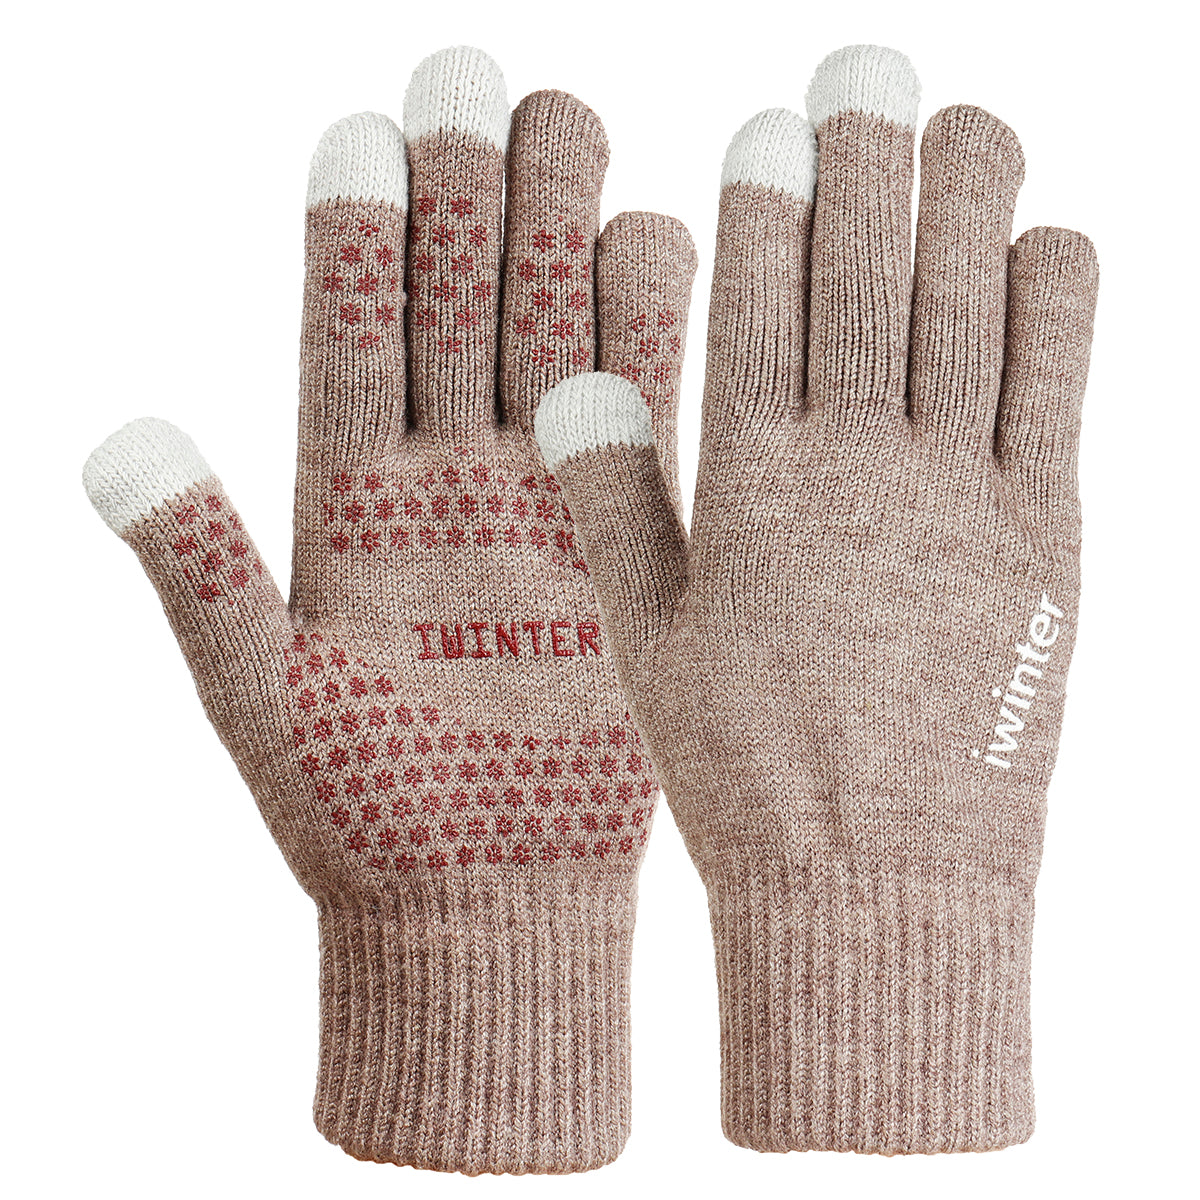 Rosy Brown Knitted Touch Screen Outdoor Gloves Motorcycle Winter Warm Windproof Fleece Lined Thermal Non-slip